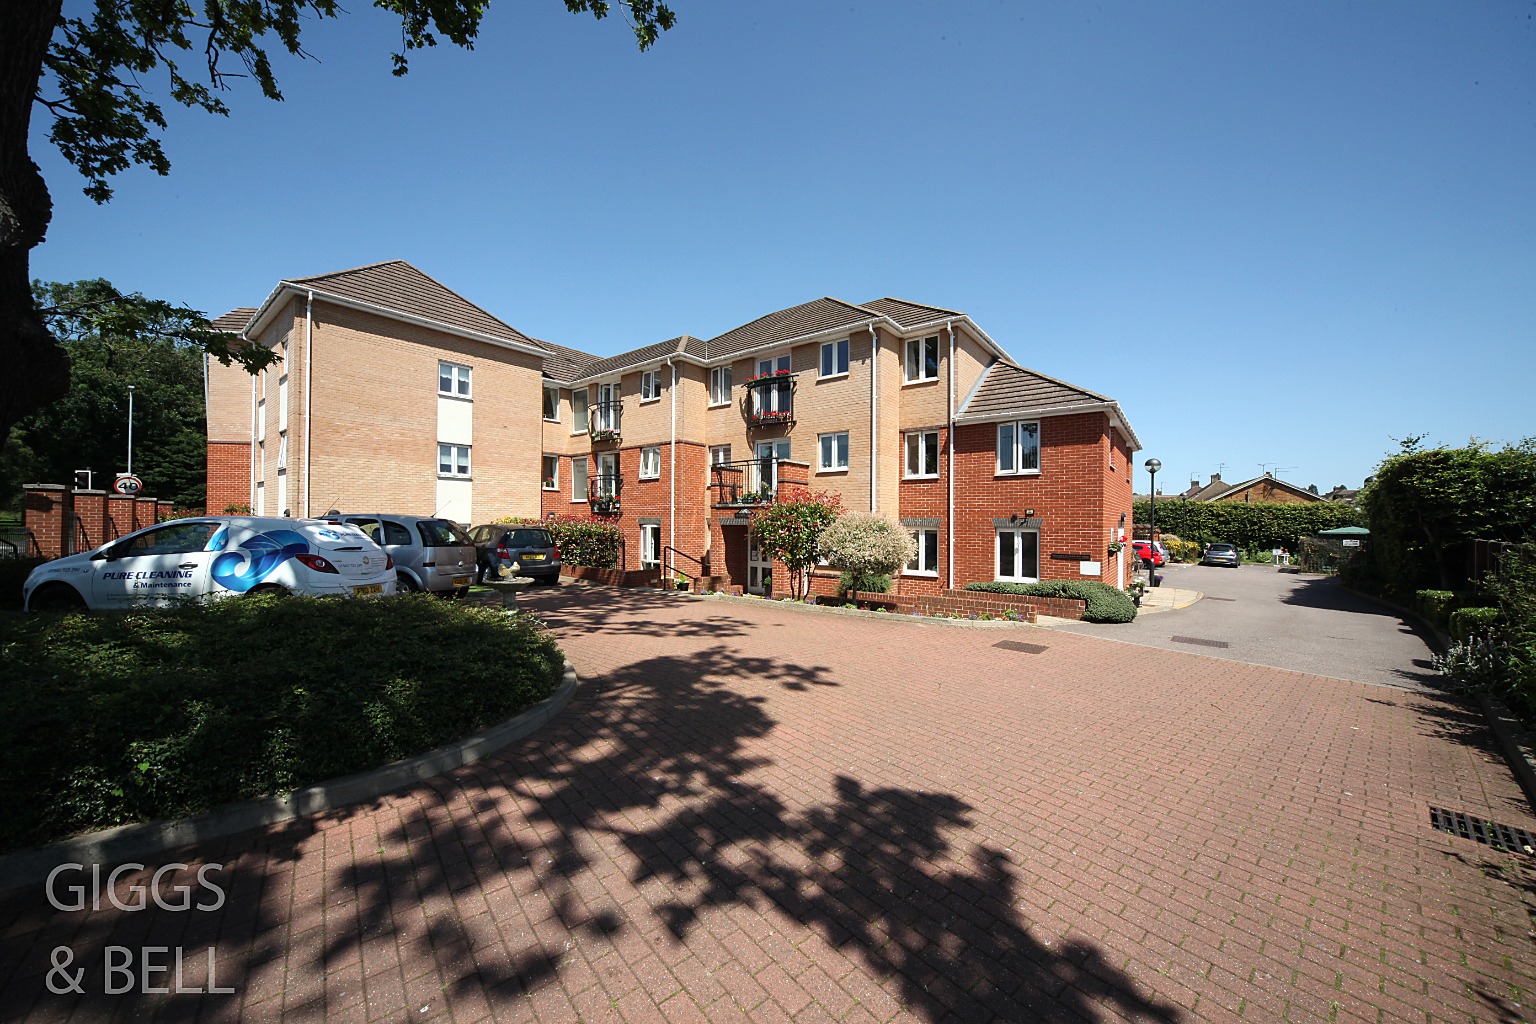 2 bed flat for sale in Cannon Lane, Luton, LU2 